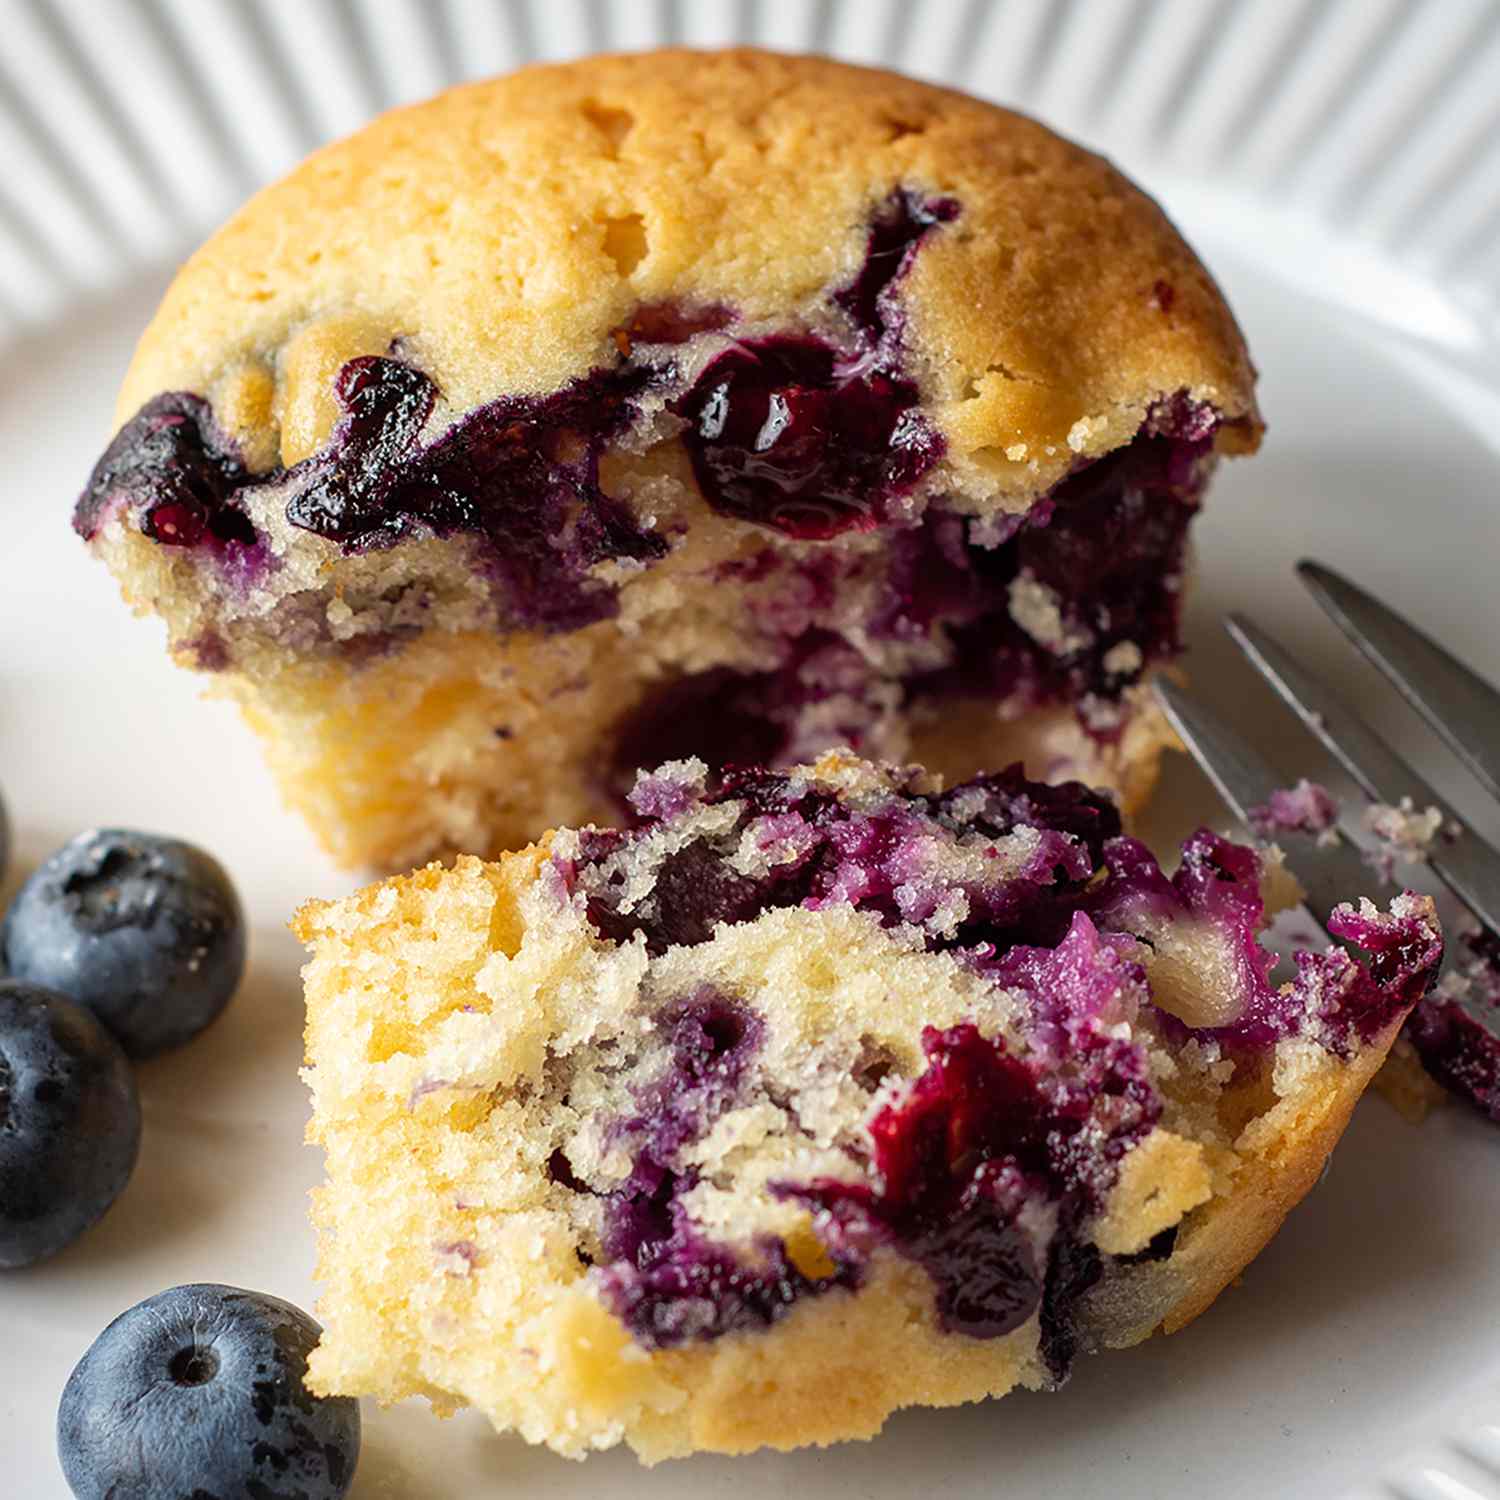 A blueberry muffin broken open with more fresh blueberries on the plate